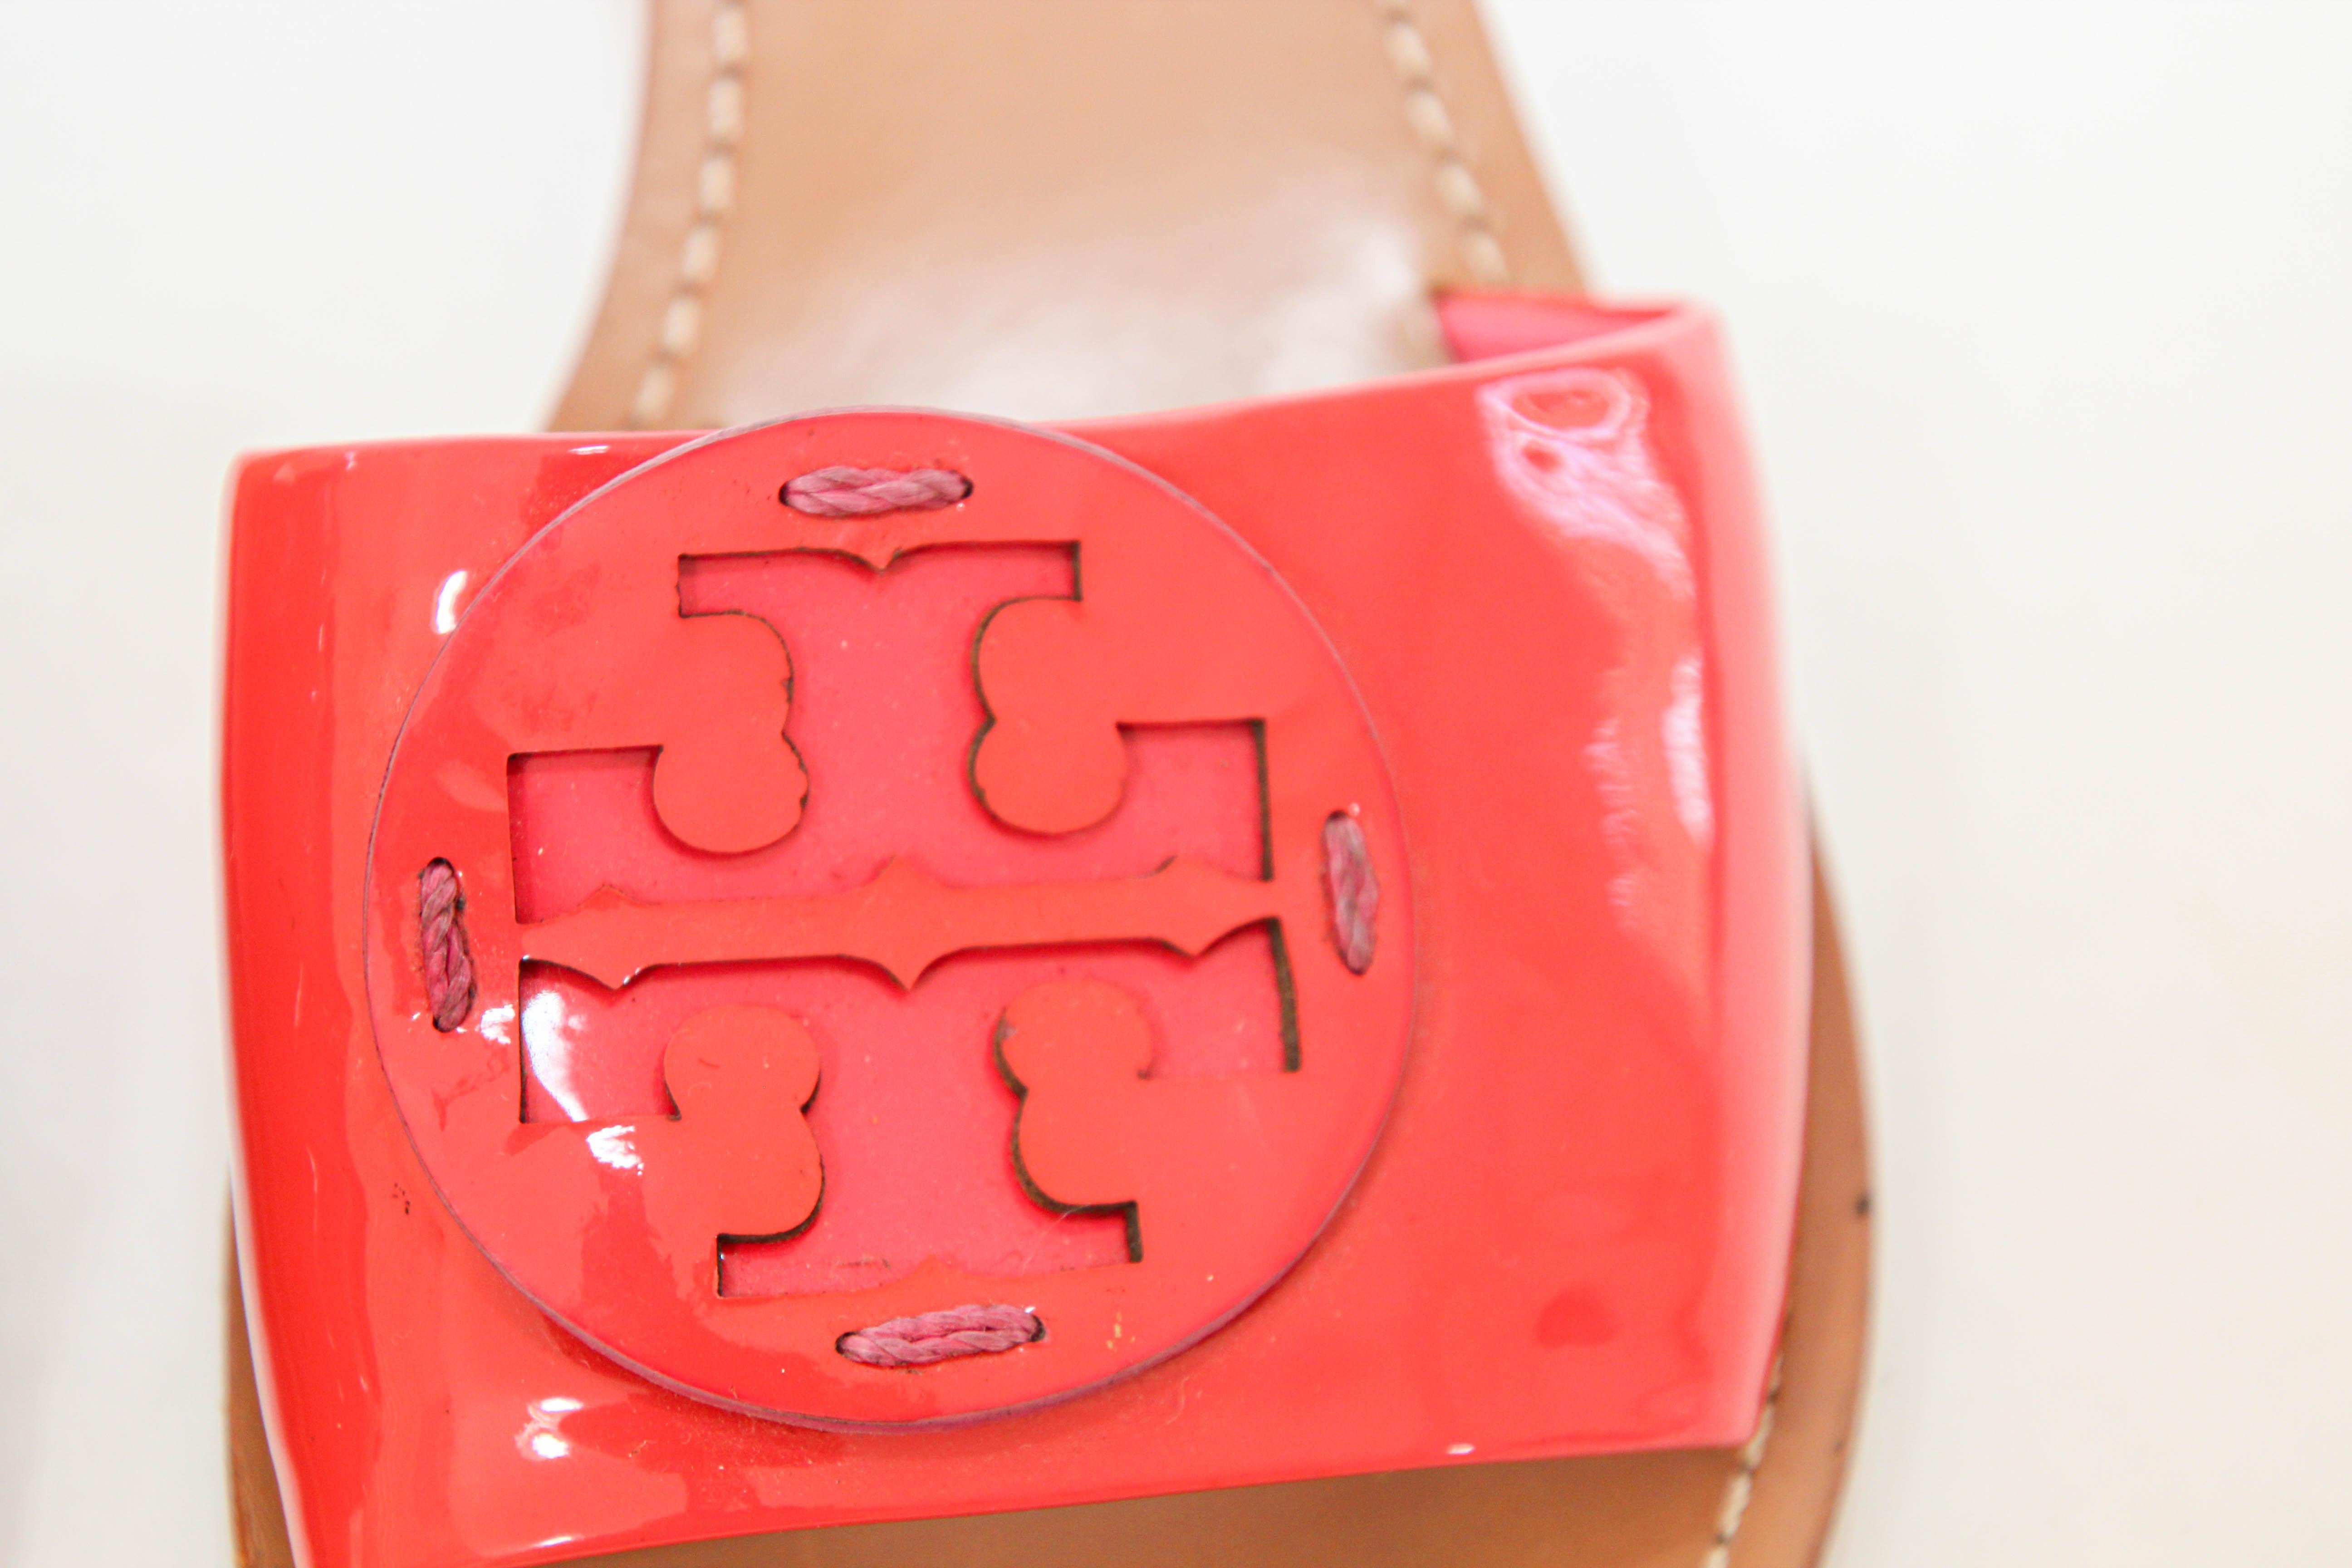 Tory Burch Patent Leather Pink Sandals size 8 M For Sale 2